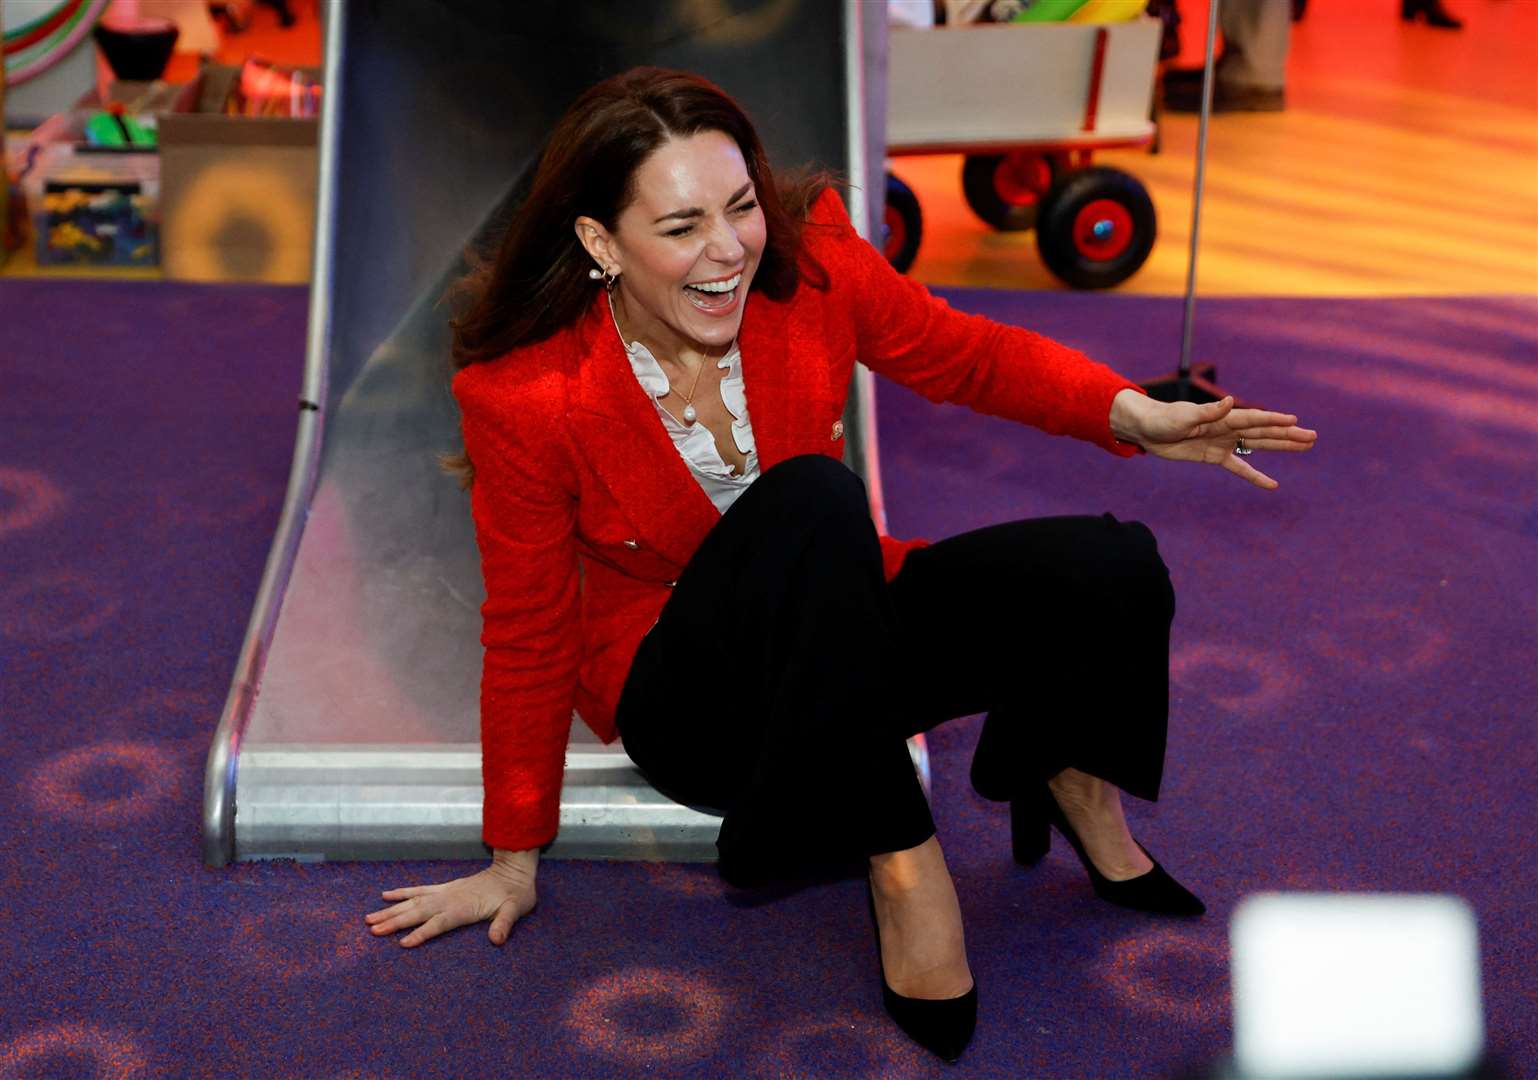 The then-Duchess of Cambridge during a visit to the Lego Foundation PlayLab at the Carlsberg Campus, University College Copenhagen, Denmark, on day one of a two-day working visit with The Royal Foundation Centre for Early Childhood (John Sibley/PA)